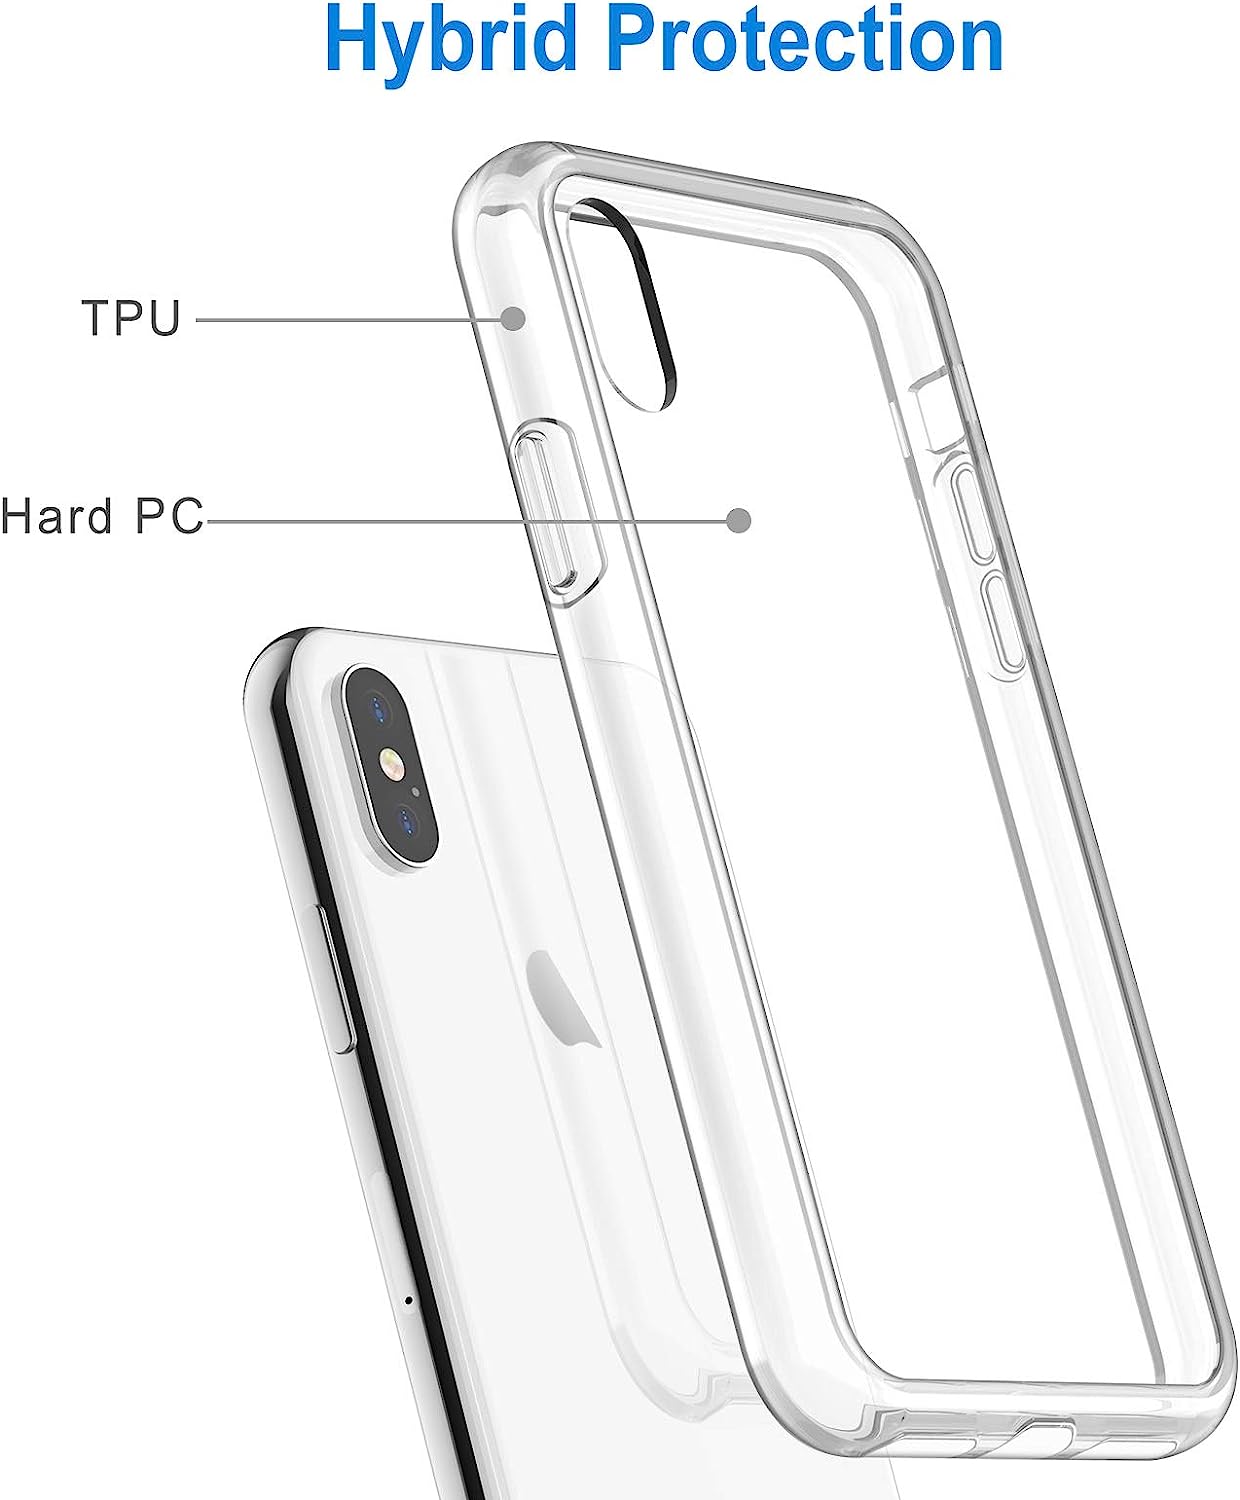 Combo Deal - Case & Screen Protector for iPhone X & Xs *Free Shipping*